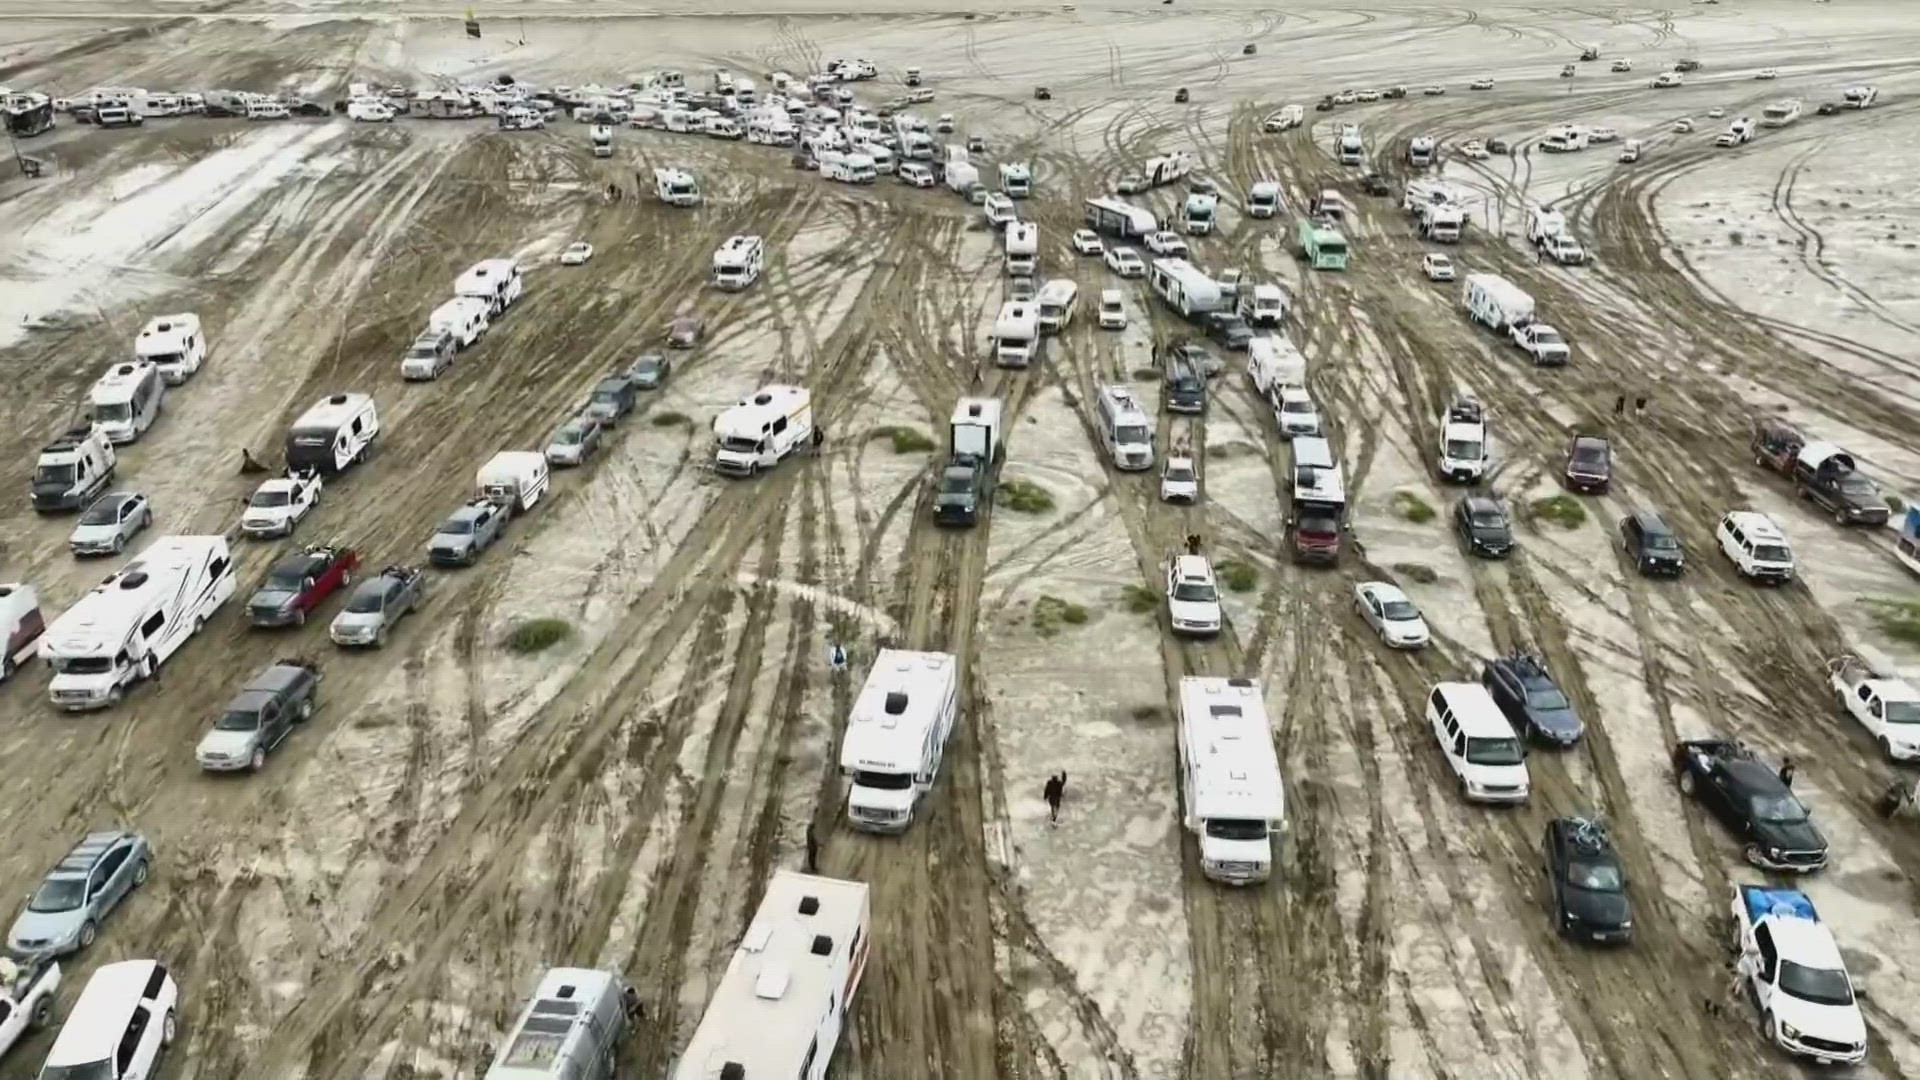 Burning Man attendees trapped as flooding shuts down entrance